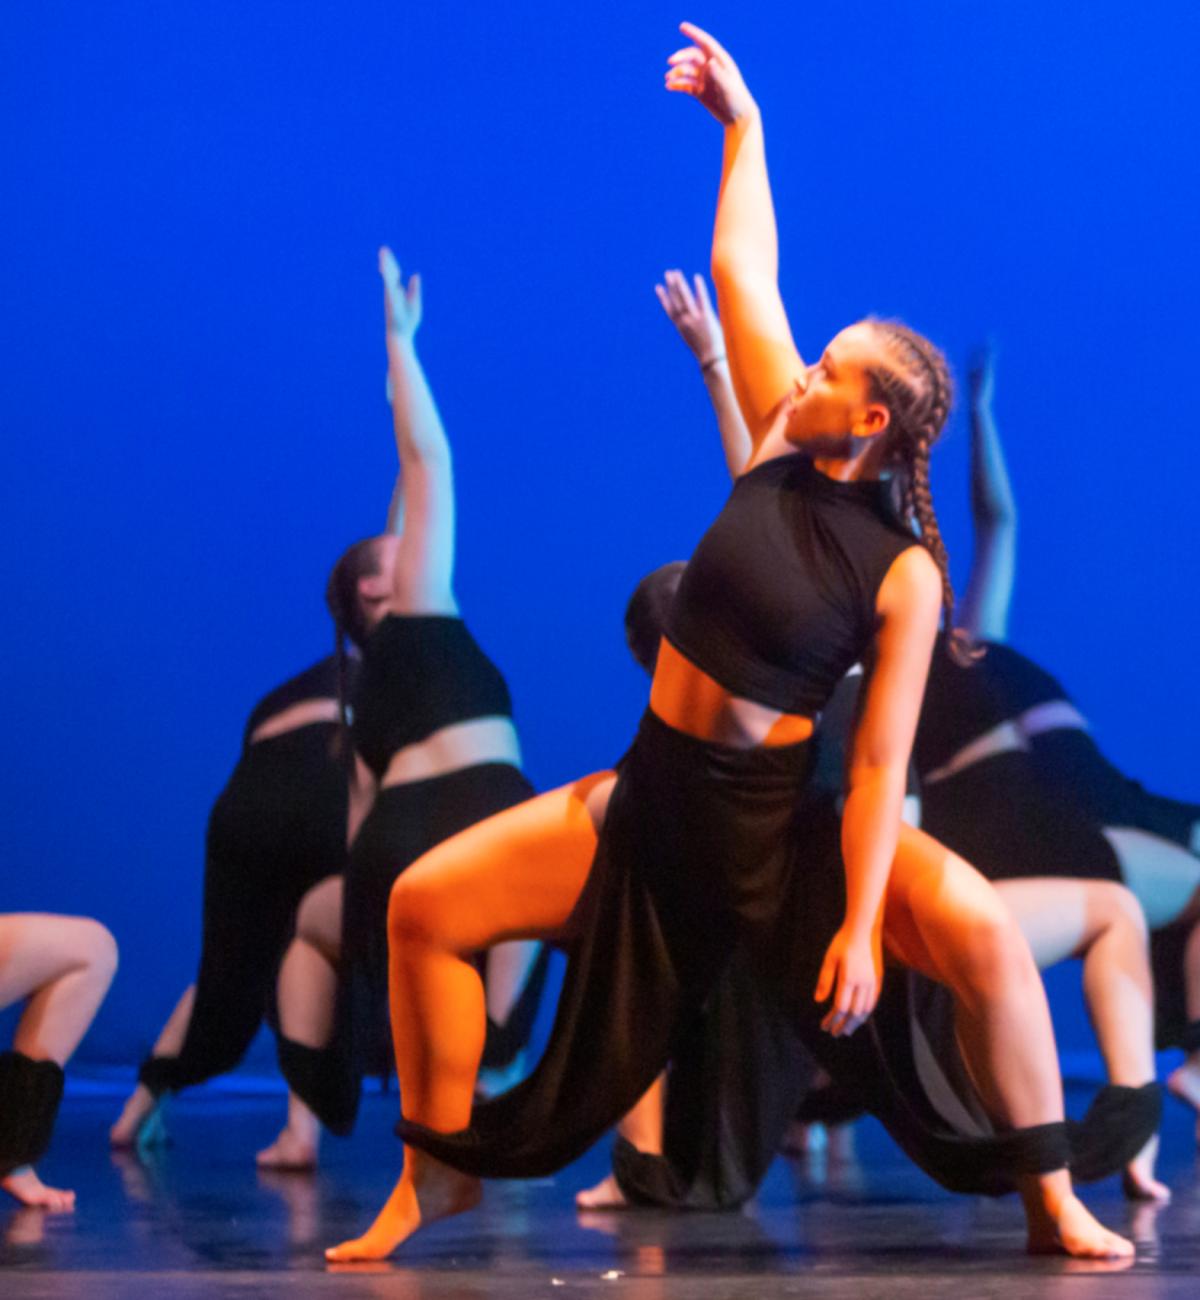 We invite you to join us for a virtual dance concert, featuring dance films created by student choreographers in various styles, including hip-hop, tap, and contemporary.